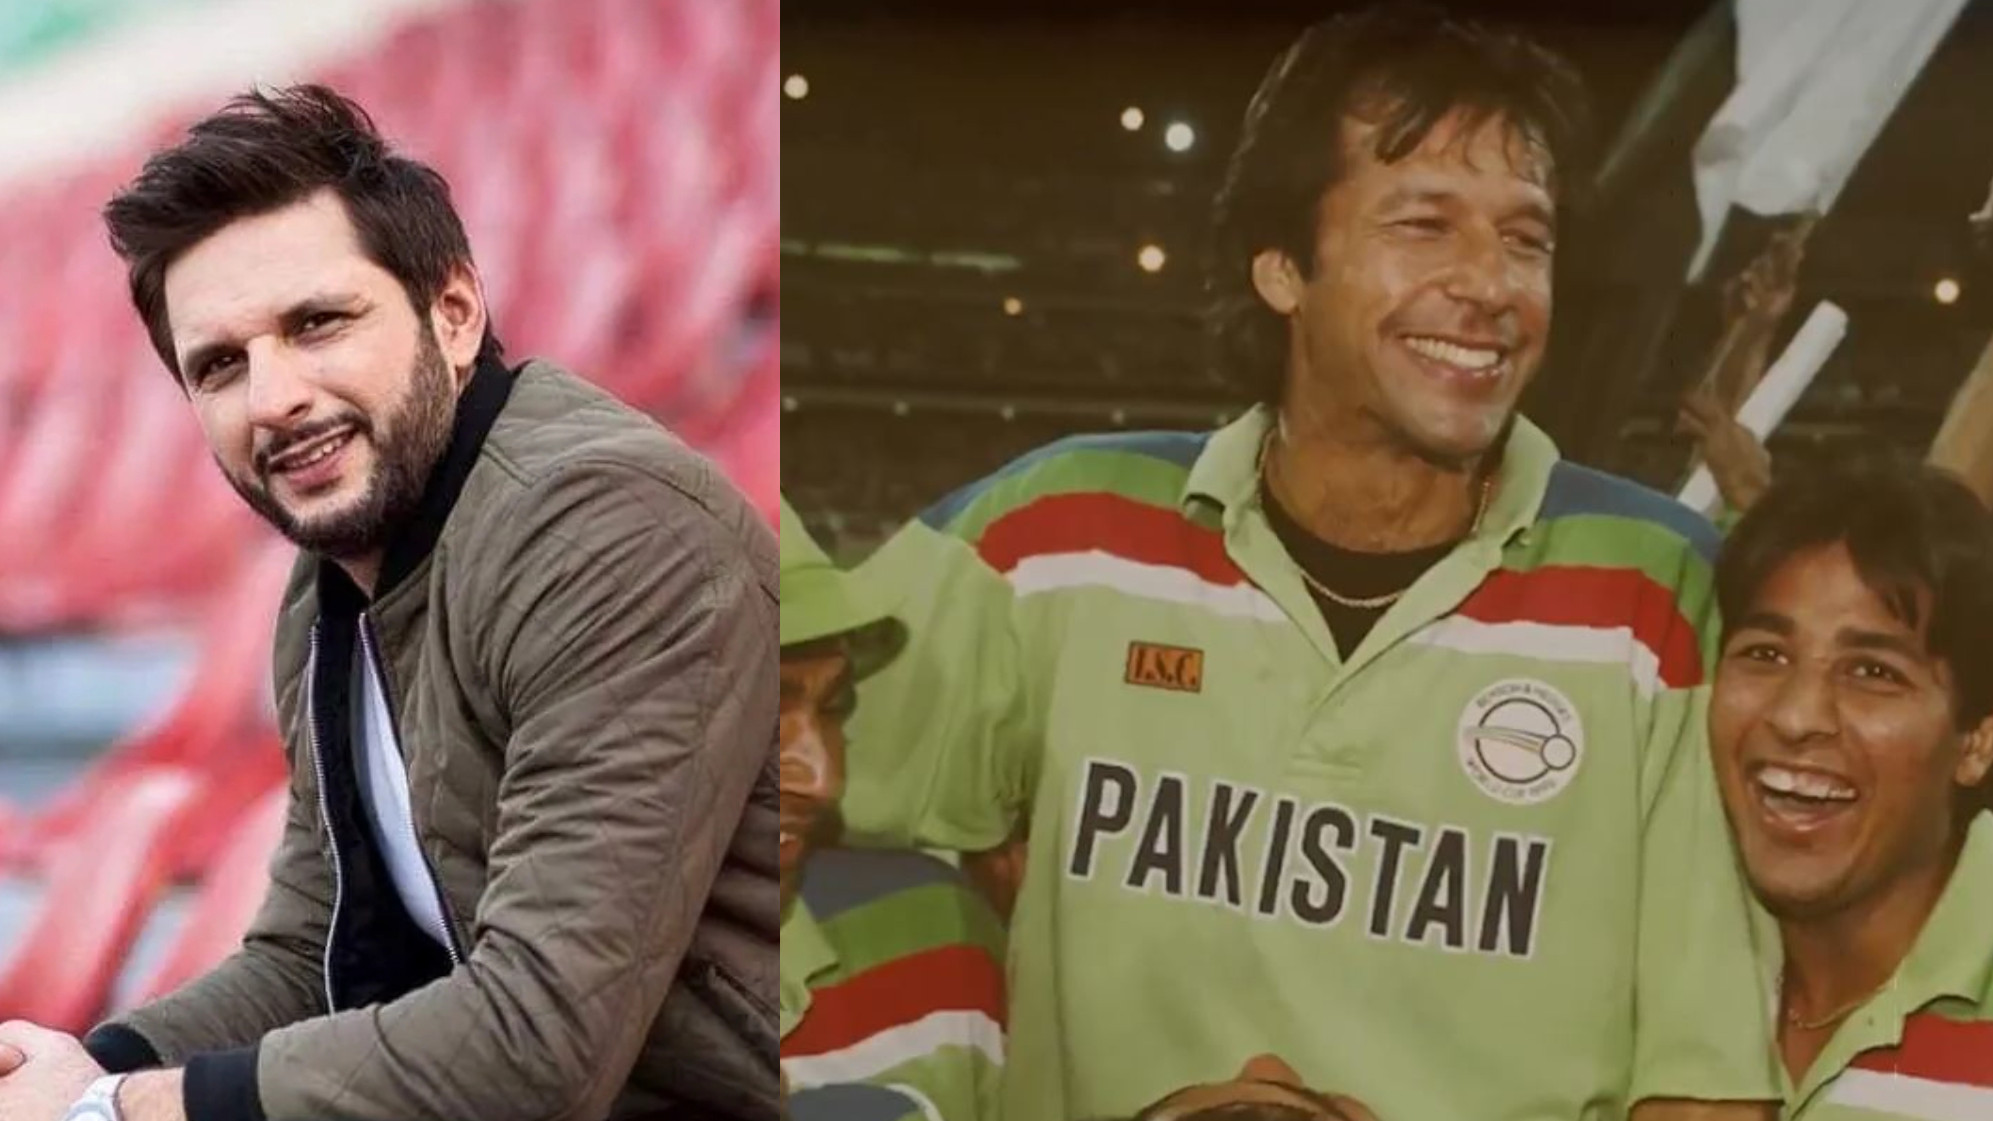 Shahid Afridi takes a ‘political’ dig as PCB adds Imran Khan to tribute video after backlash